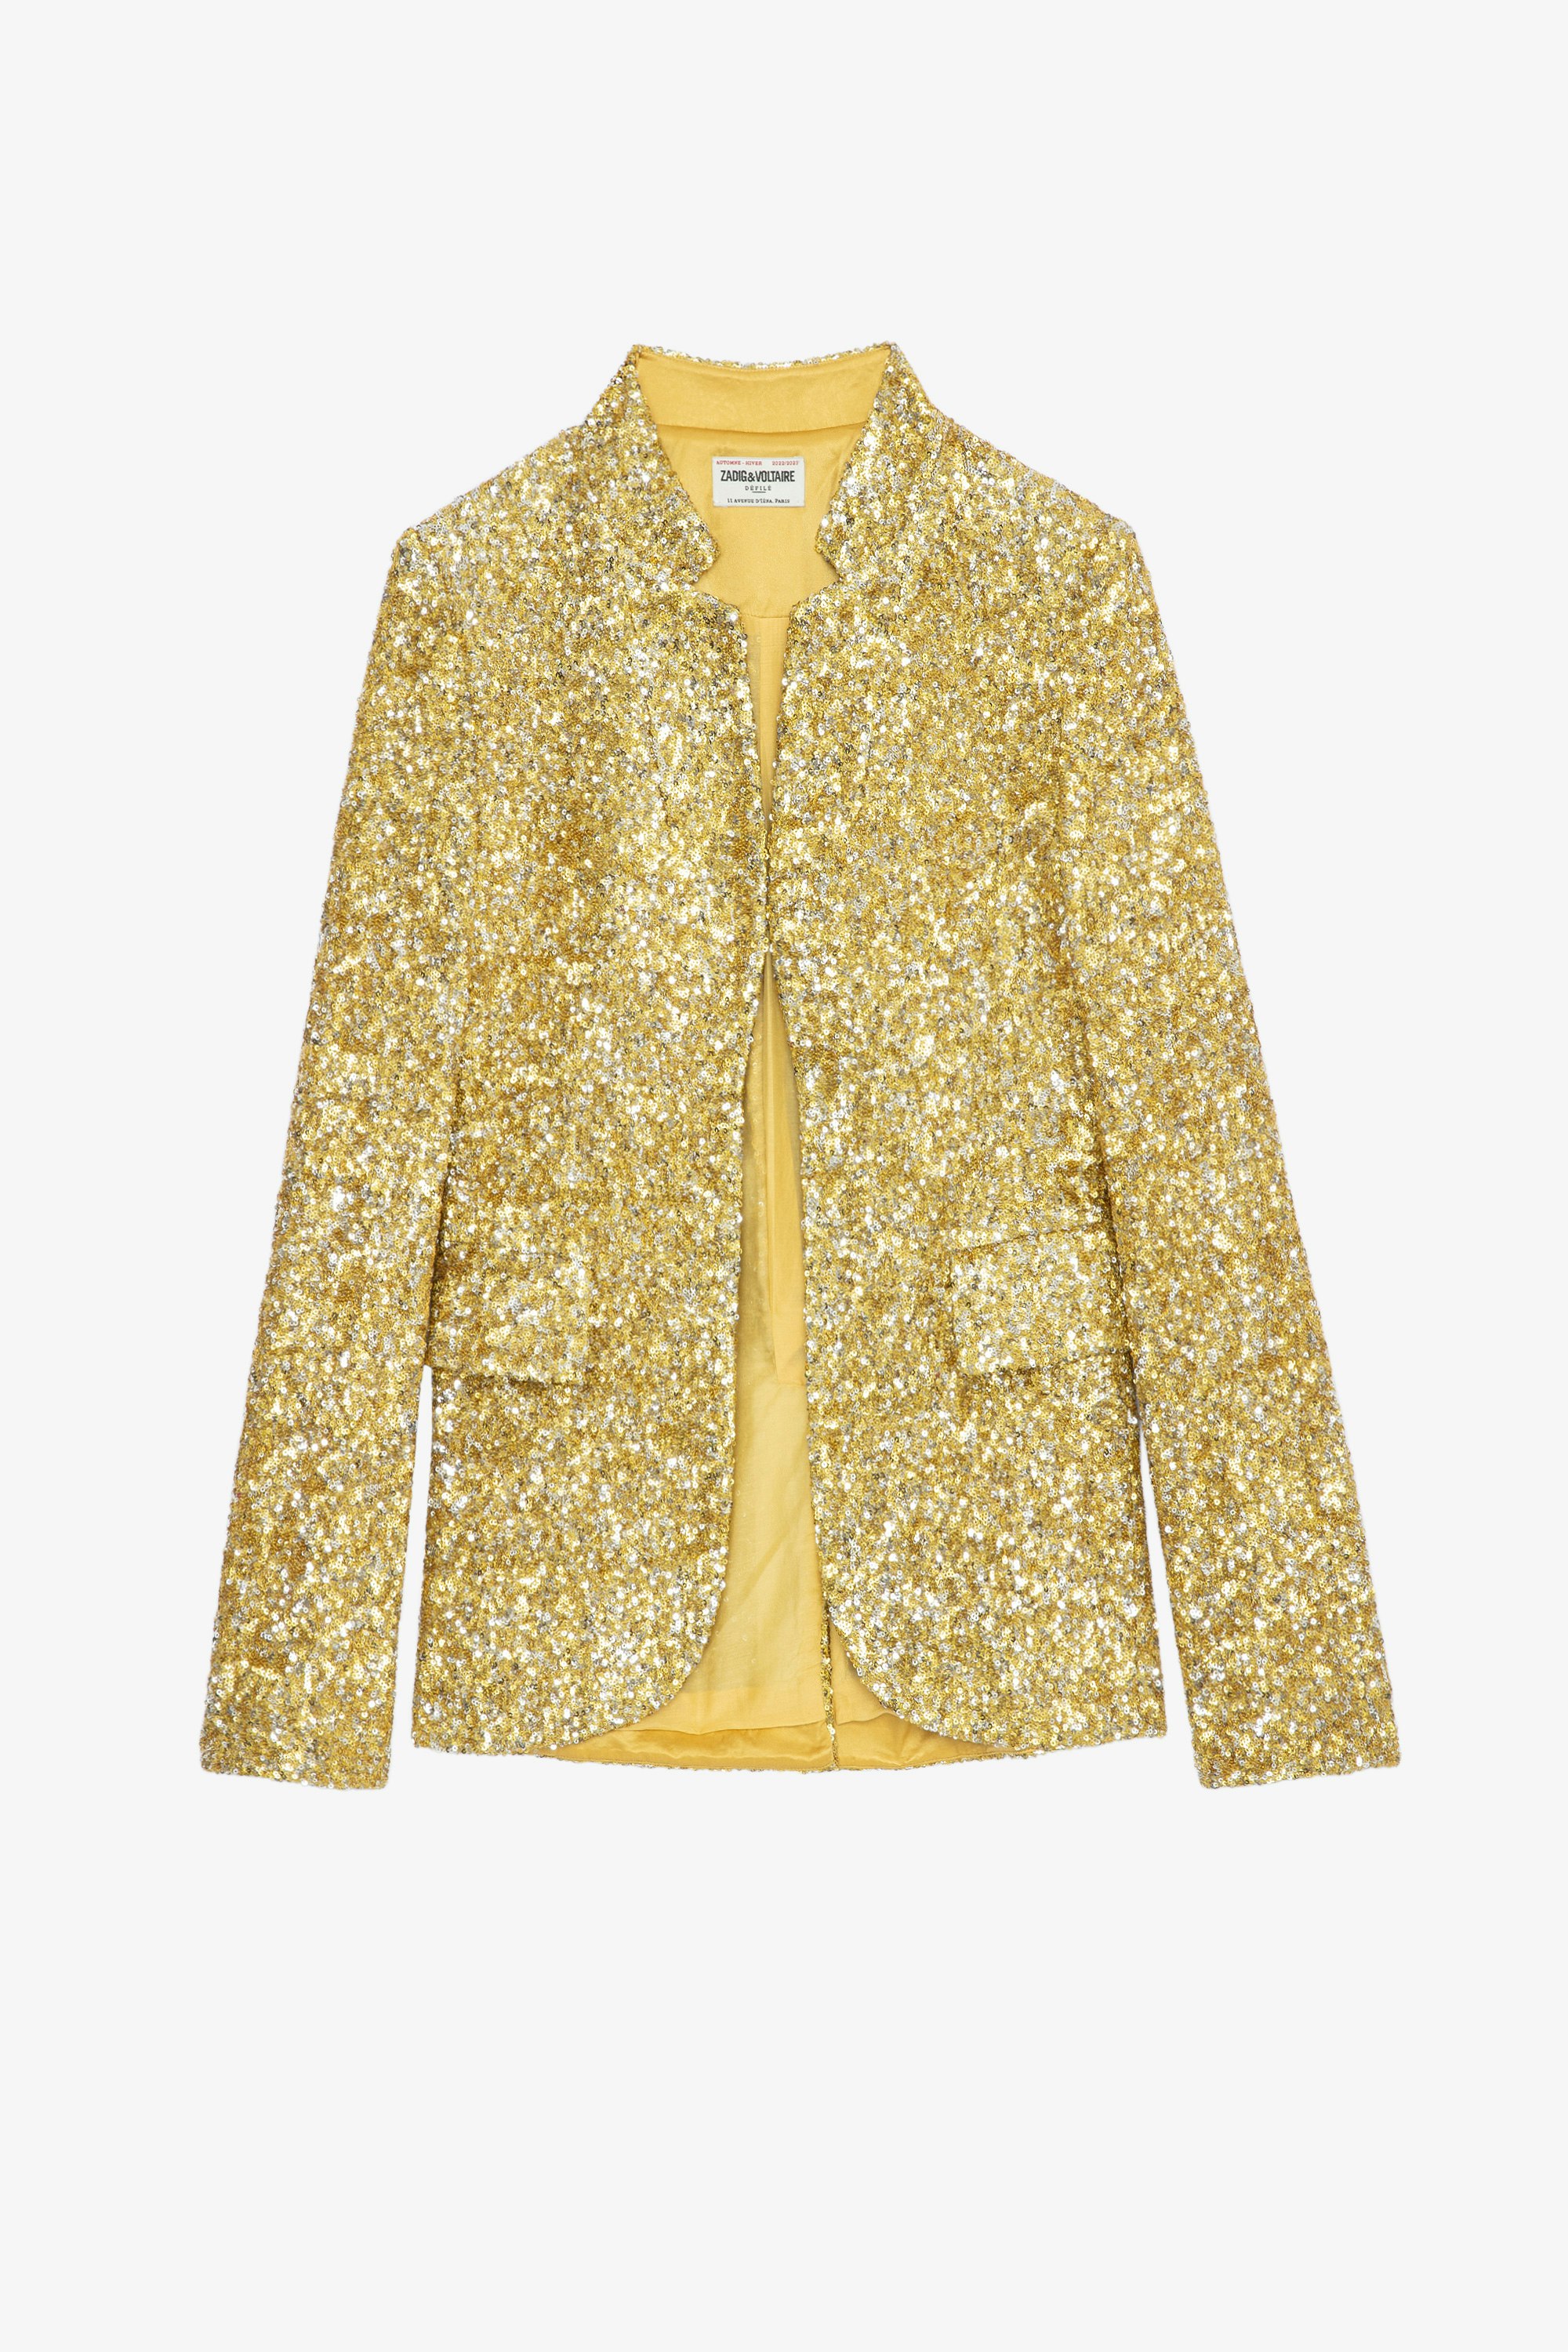 Very Sequins ジャケット Women’s structured jacket with gold sequins 